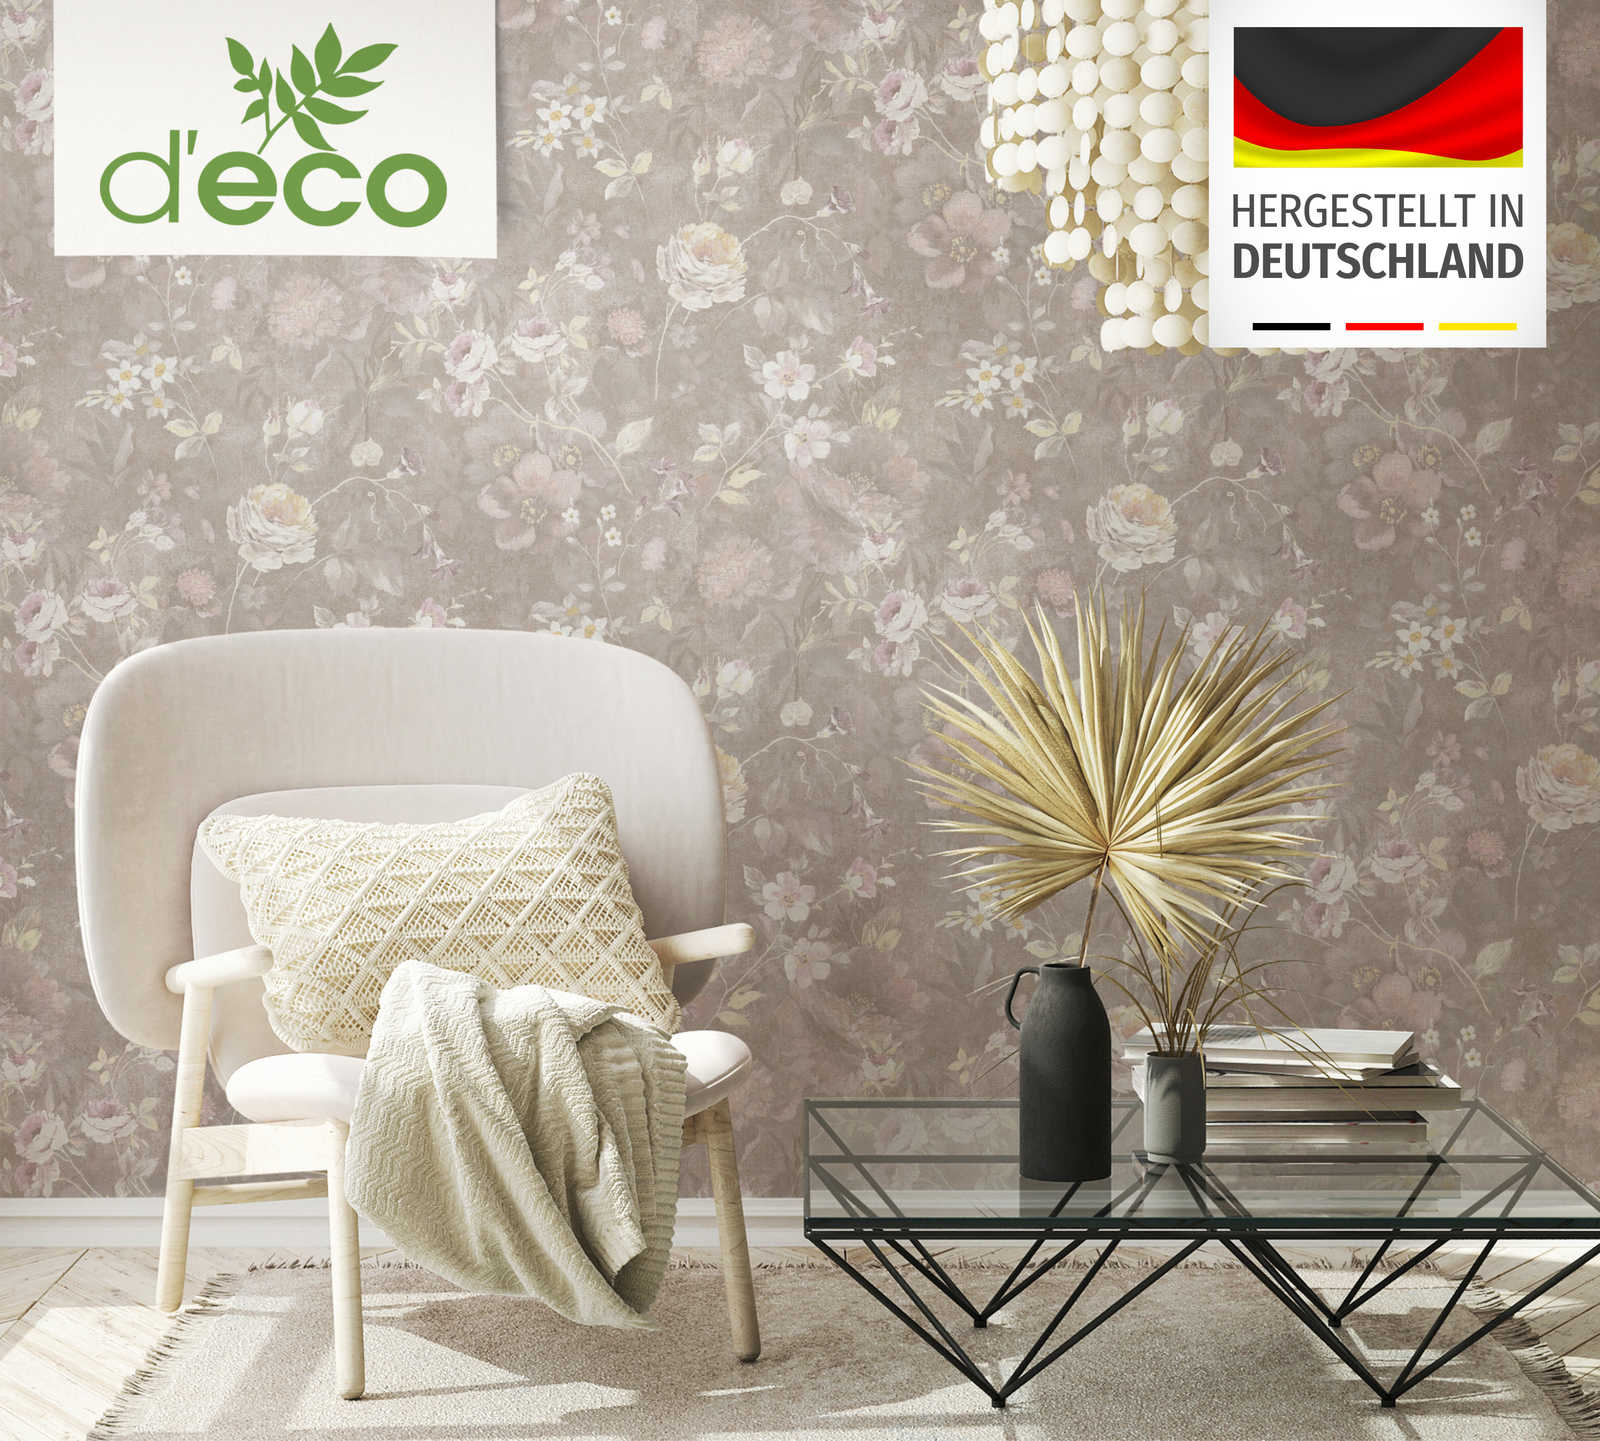             PVC-free non-woven wallpaper with floral pattern - brown, colourful, orange
        